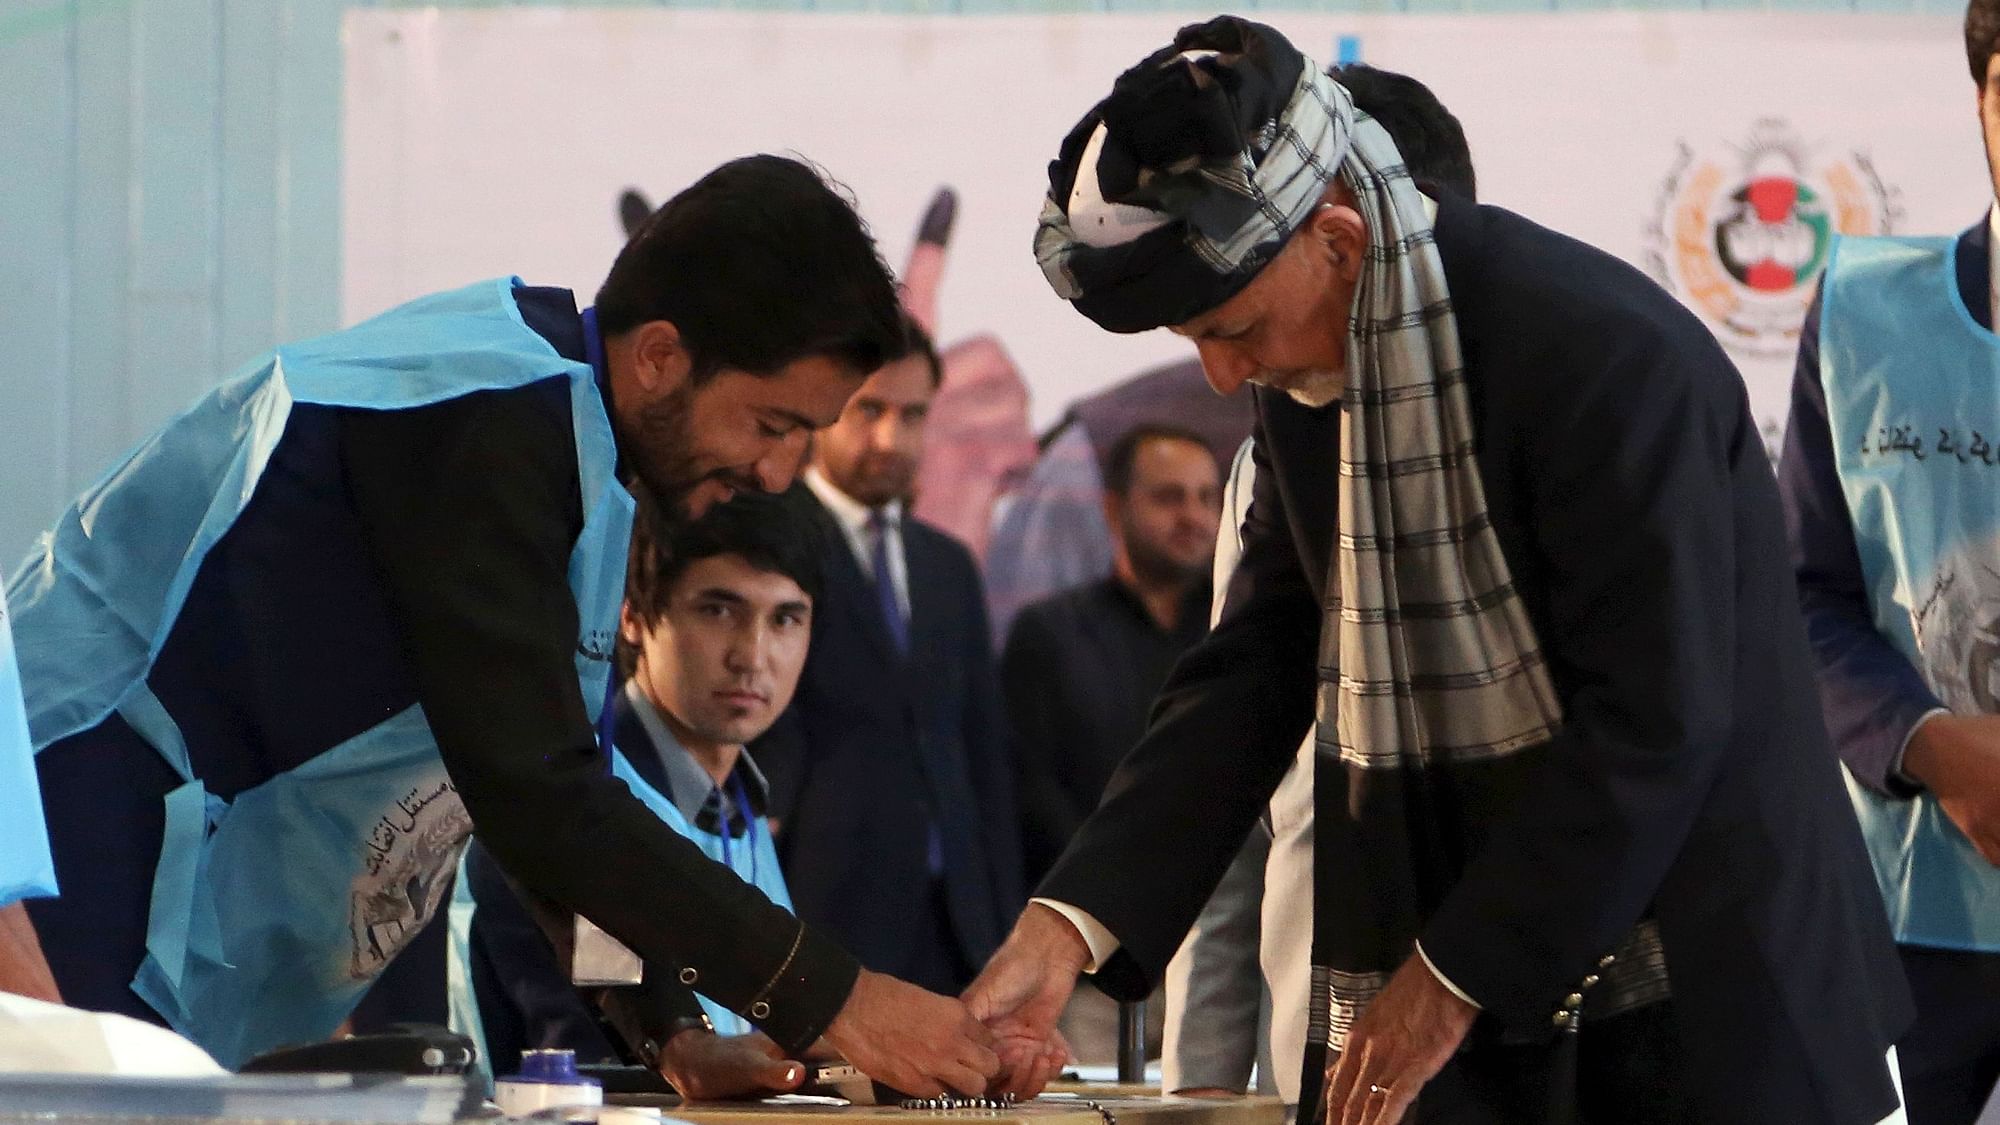 Afghan President Ashraf Ghani, right, inks his finger during the presidential election before he casts his vote at Amani high school, near the presidential palace in Kabul, Afghanistan, Saturday, 28 September, 2019.